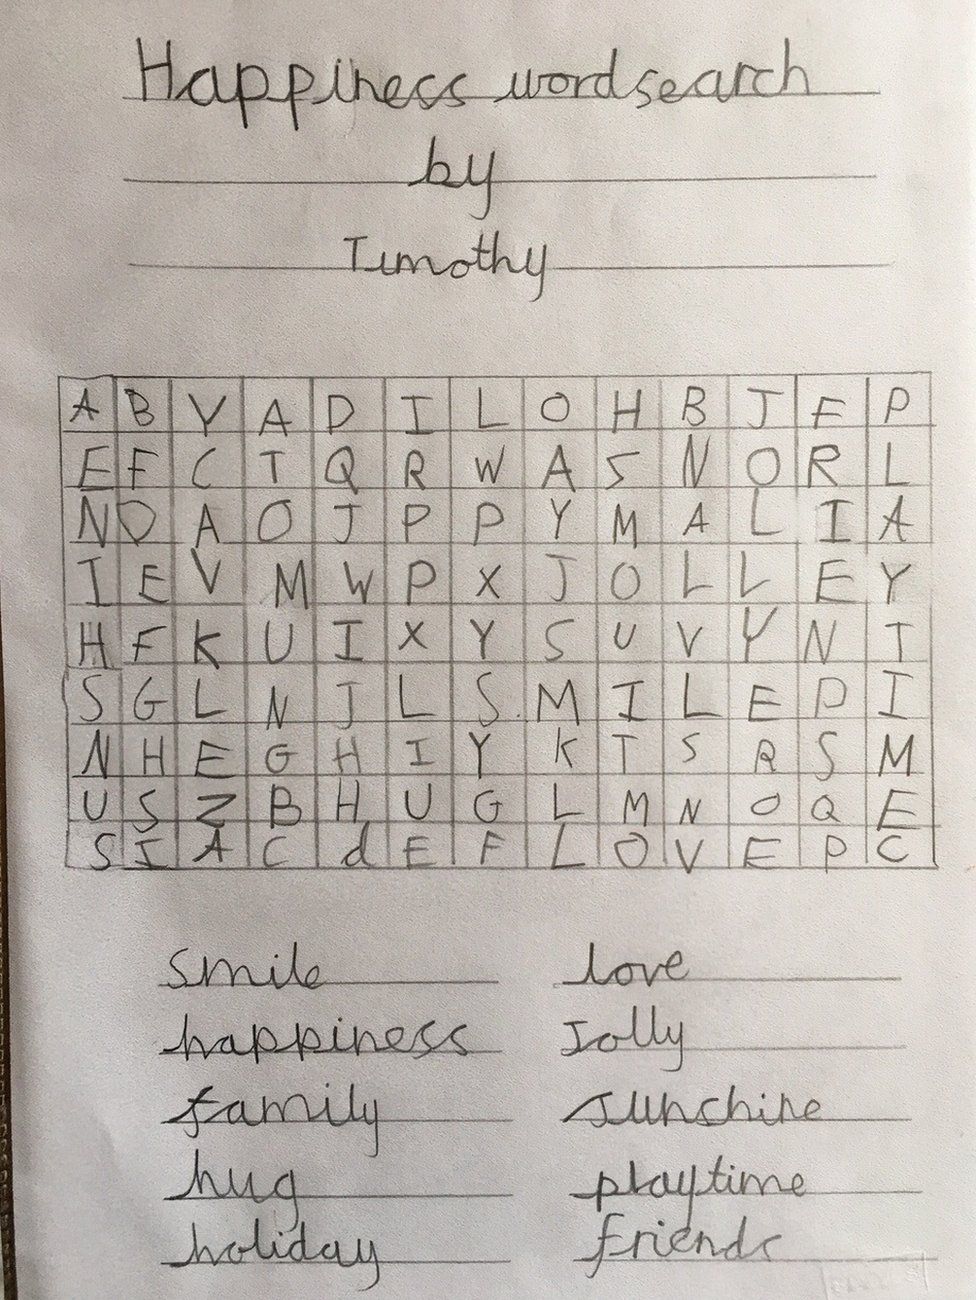 Happiness wordsearch for the Queen